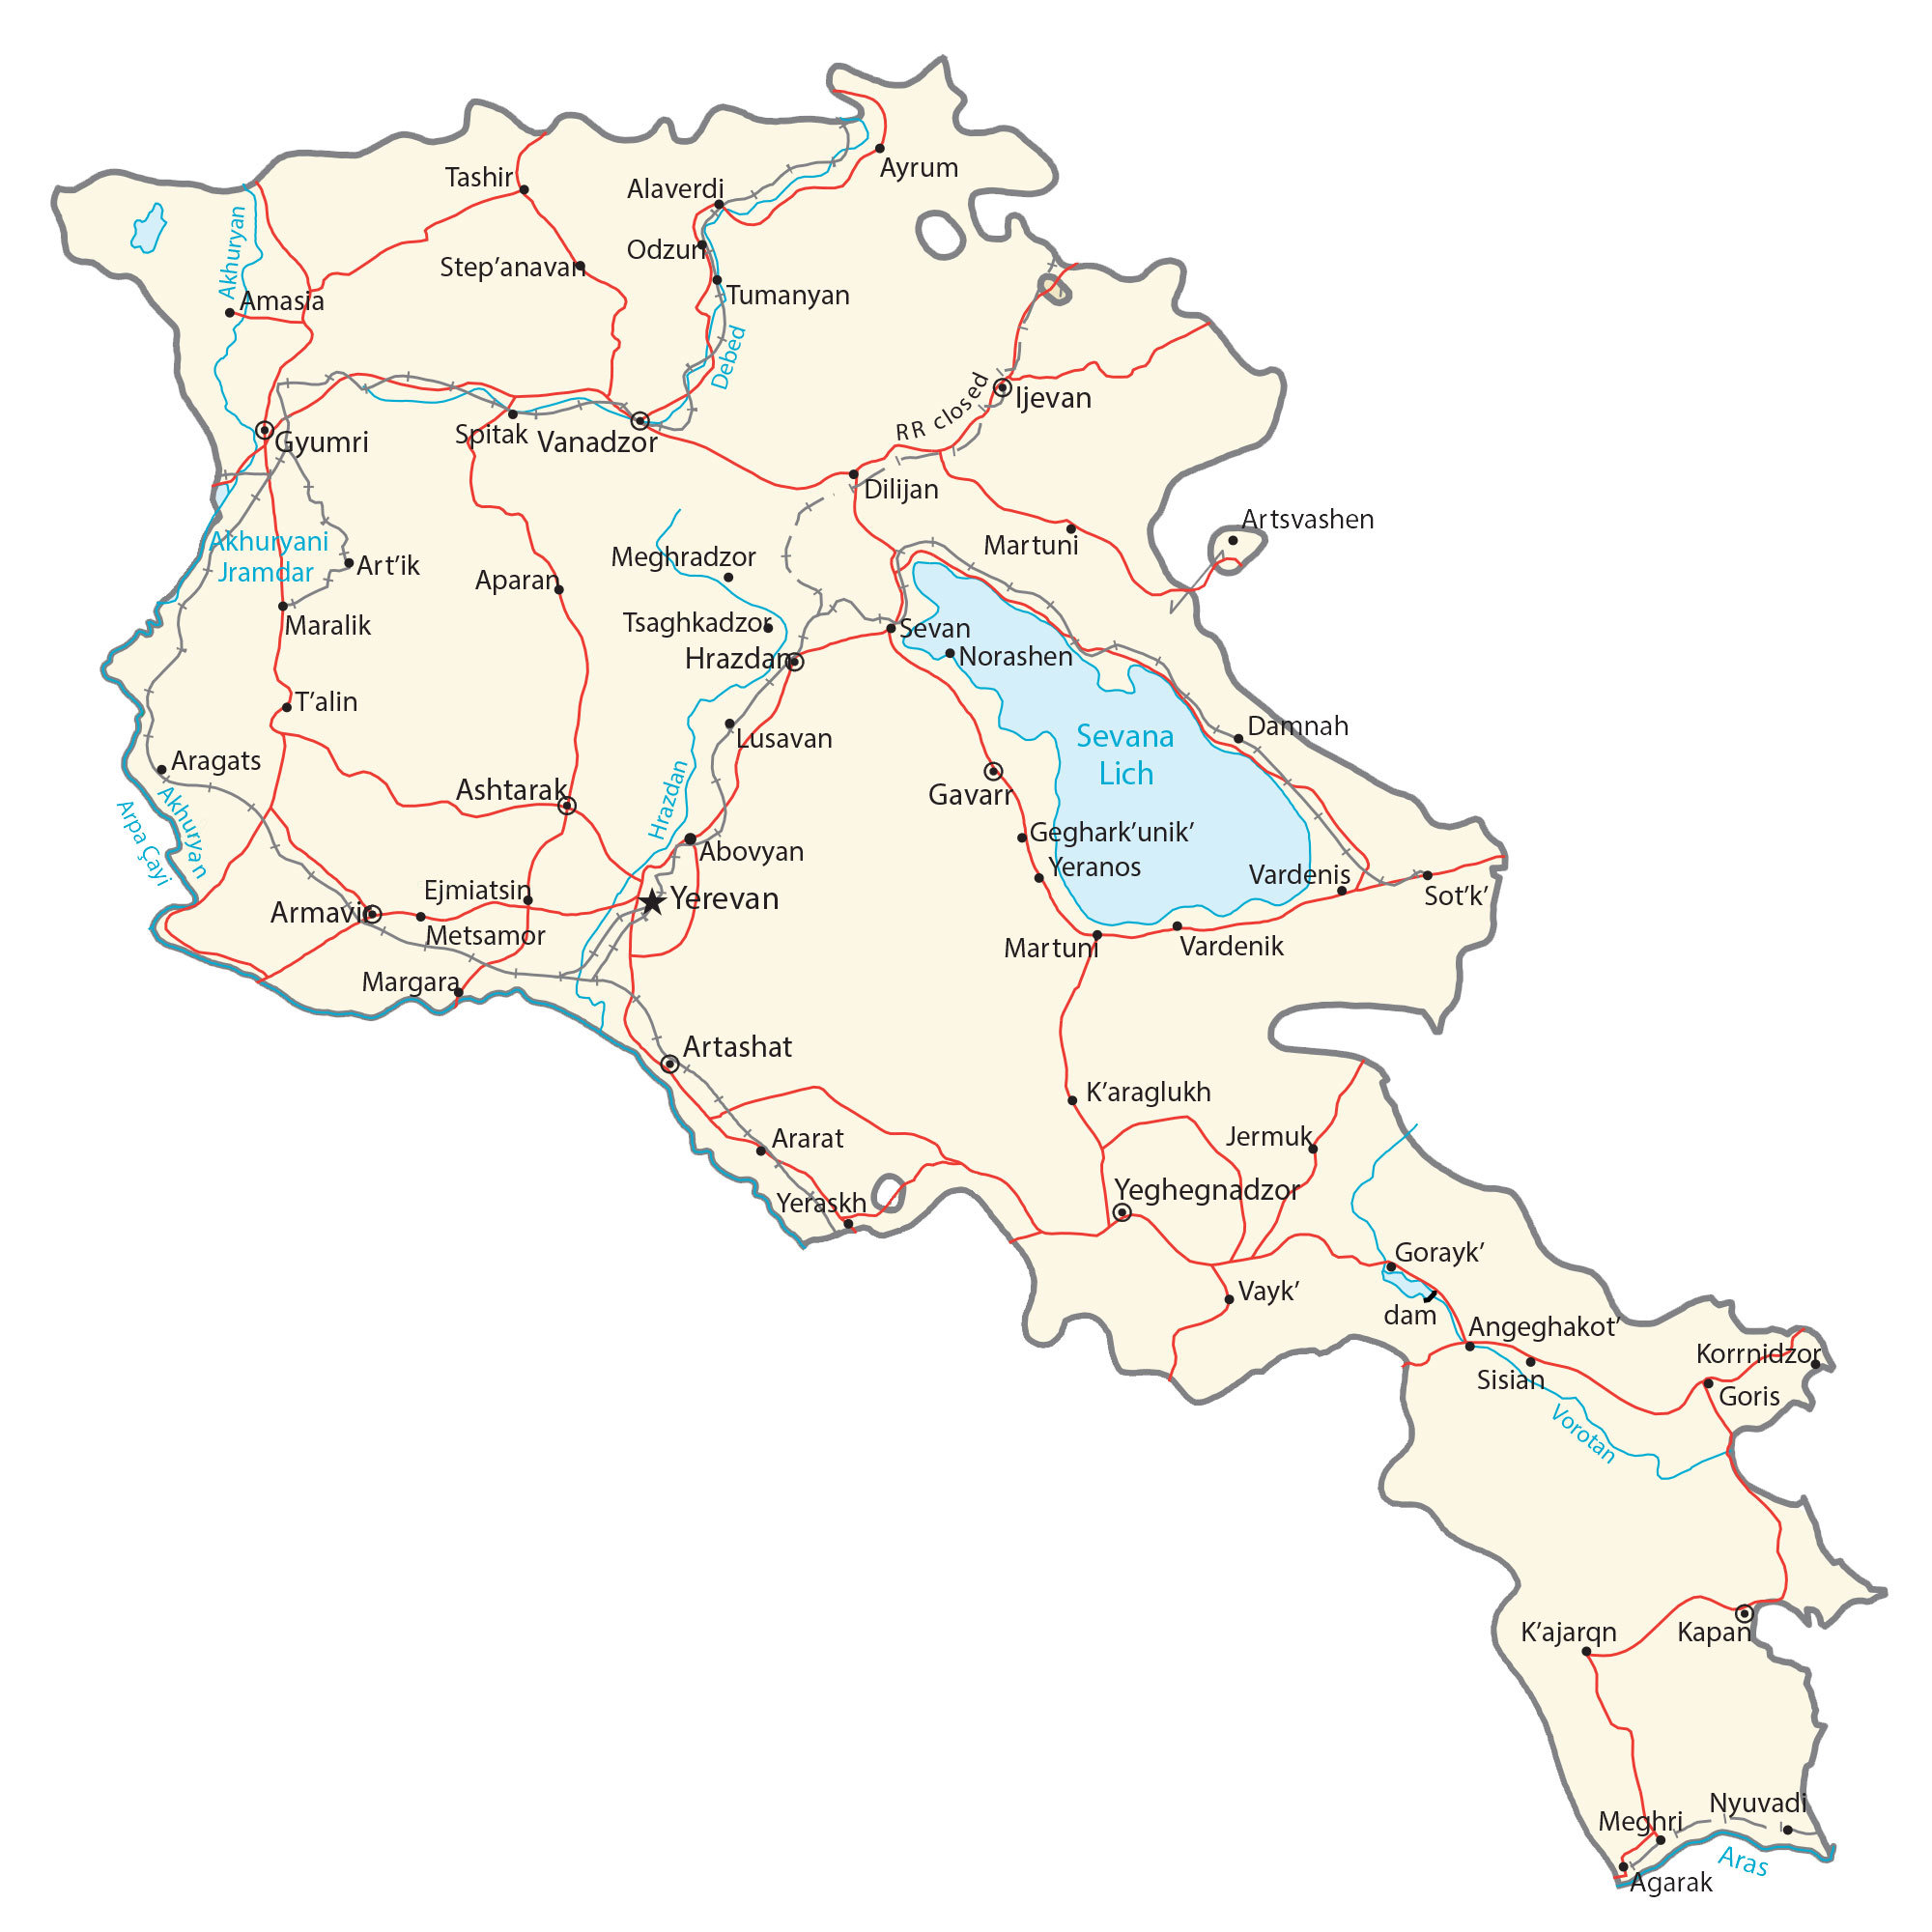 Map of Armenia - Cities and Roads - GIS Geography